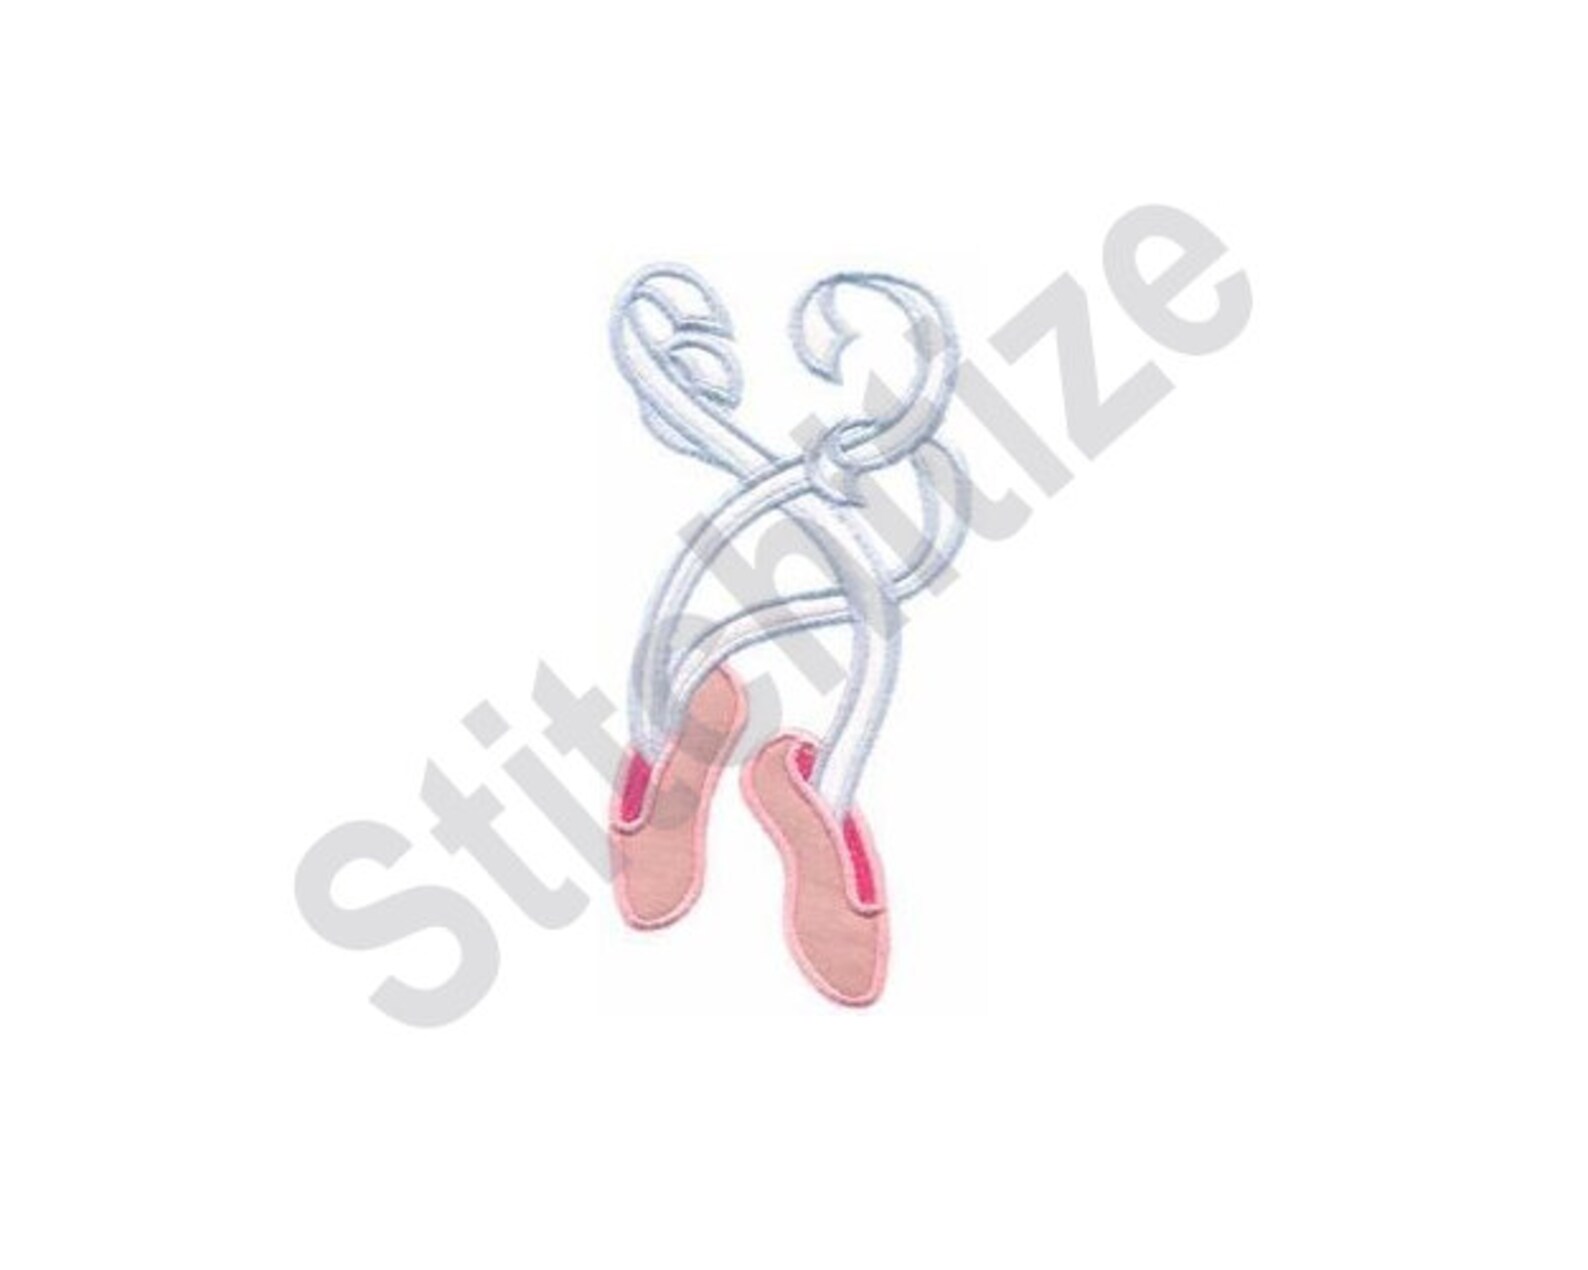 ballet slippers applique - machine embroidery design, ballet slippers, applique